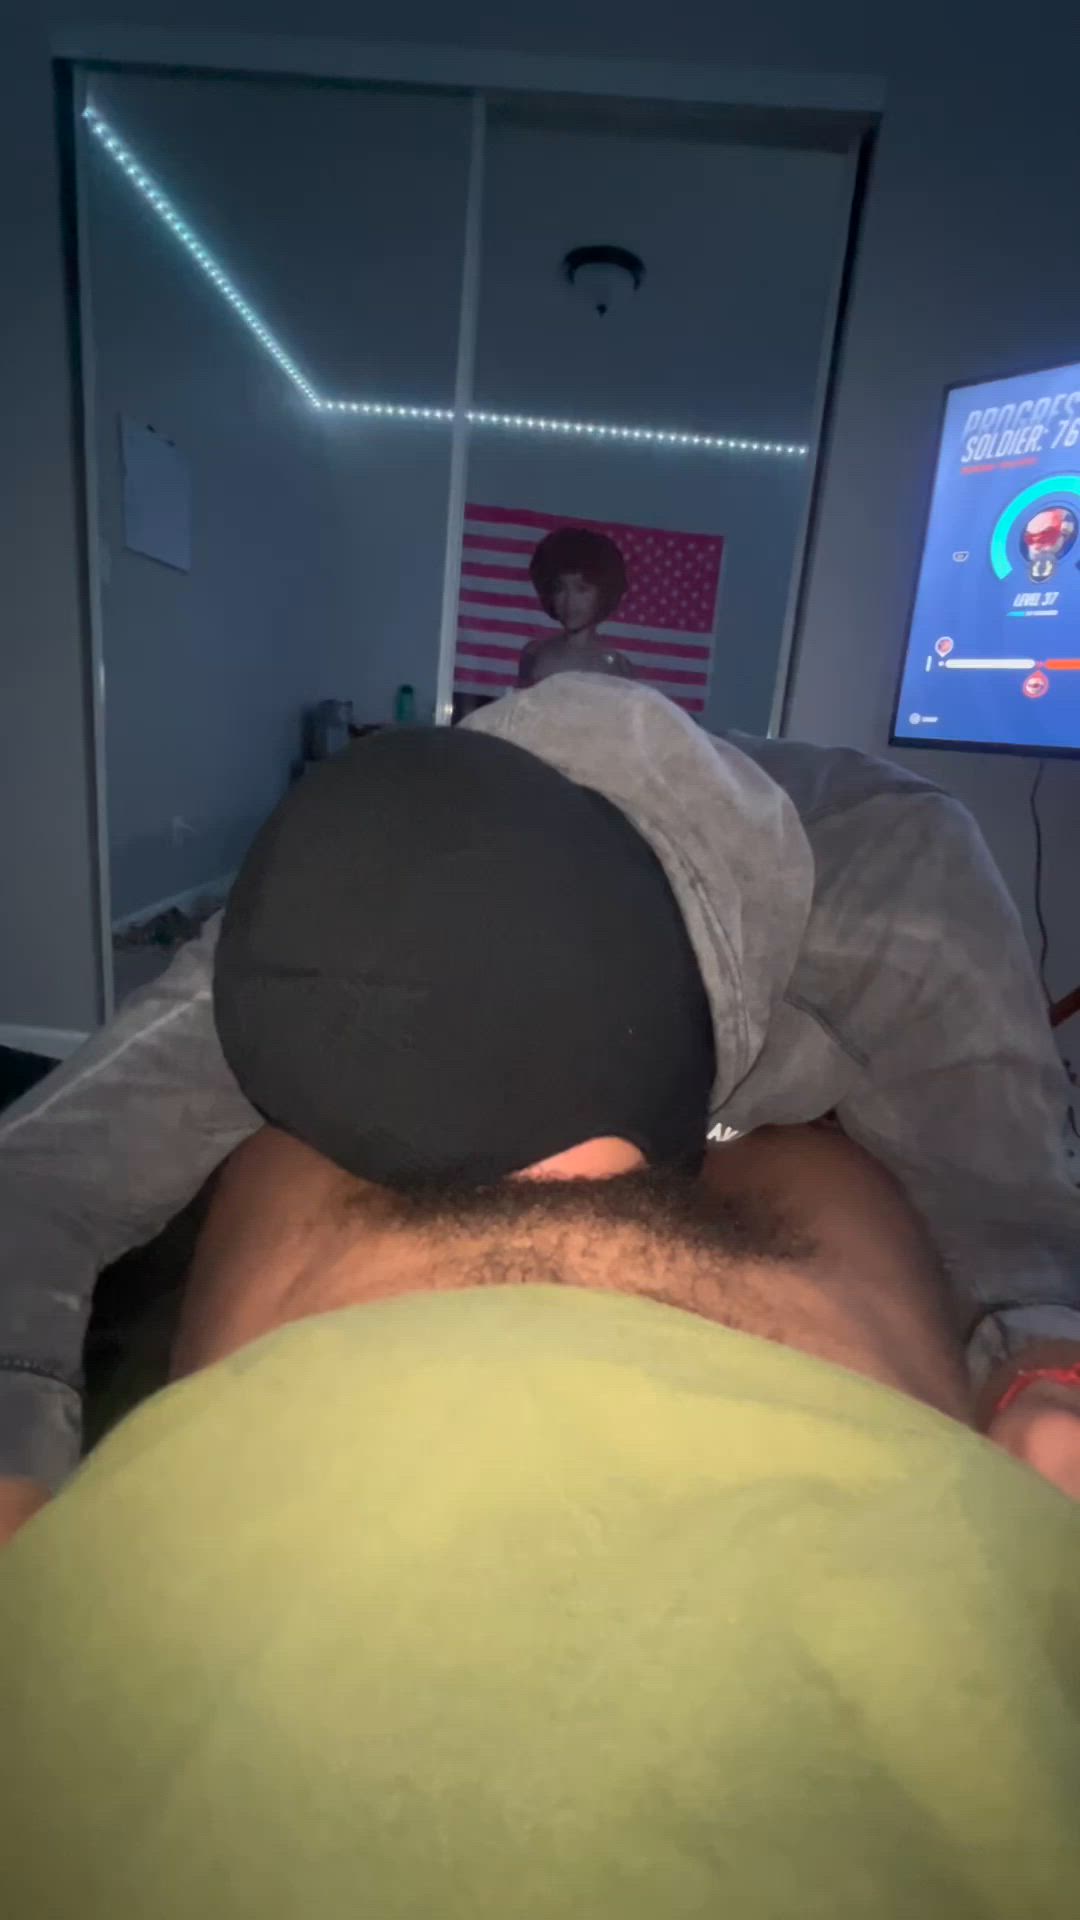 Amateur porn video with onlyfans model slutdigger69 <strong>@digbickaaron</strong>